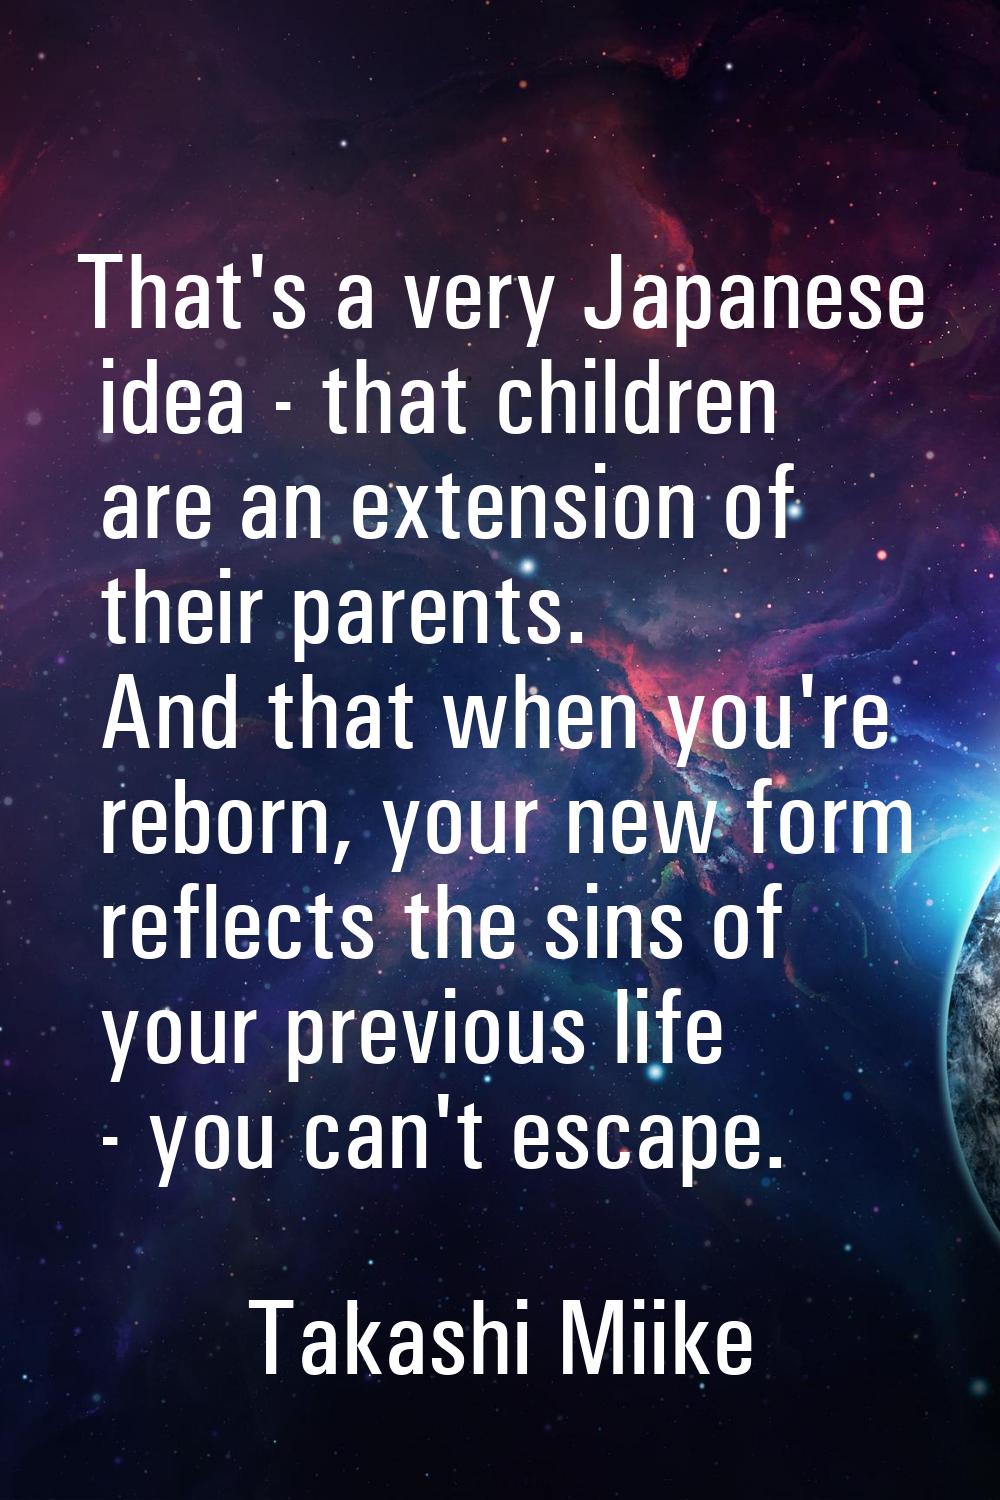 That's a very Japanese idea - that children are an extension of their parents. And that when you're